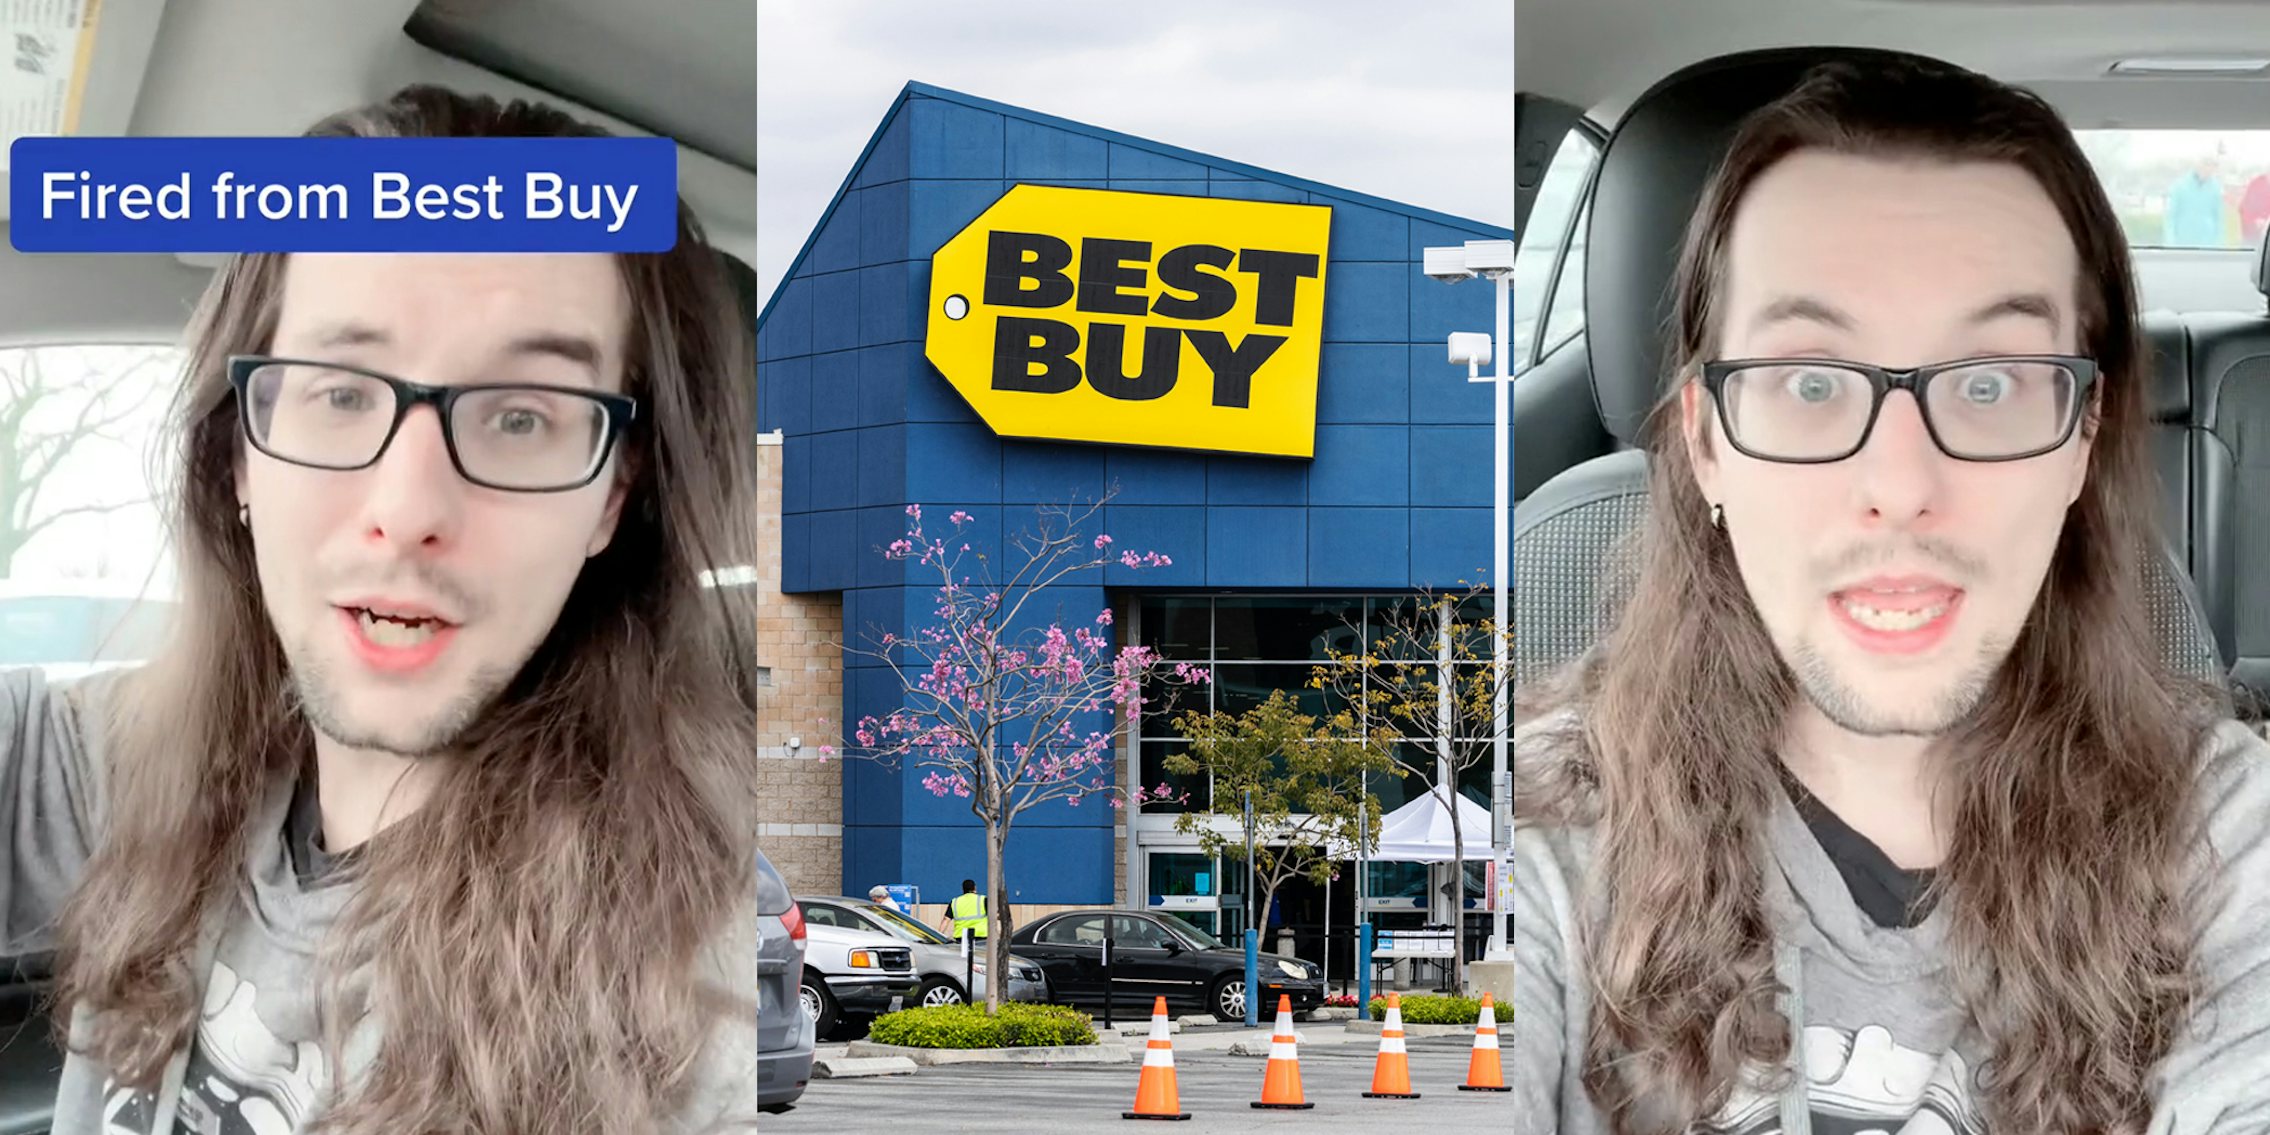 former Best Buy employee speaking in car caption 'Fired from Best Buy' (l) Best Buy building with sign and parking lot (c) former Best Buy employee speaking in car (r)